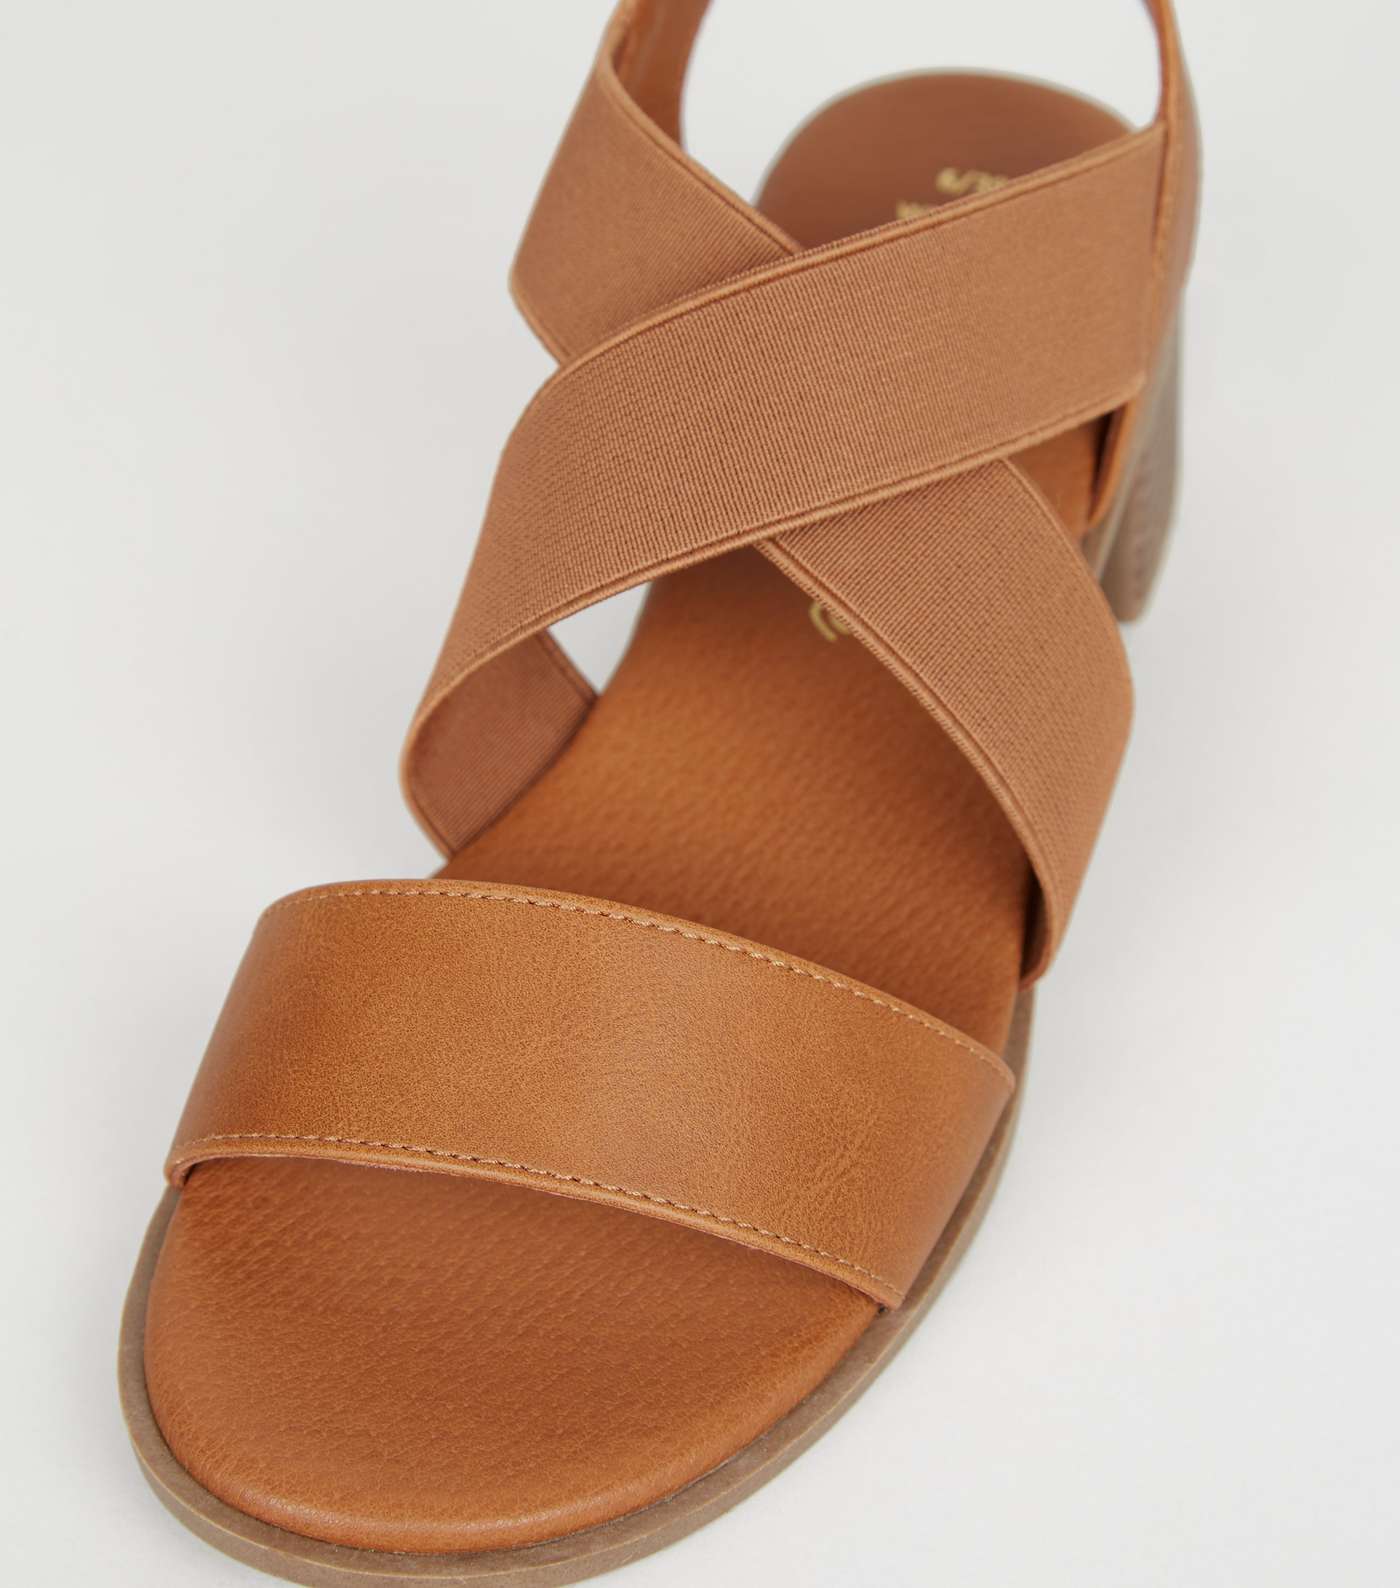 Wide Fit Tan Elastic Strappy Low Heel Sandals Image 4